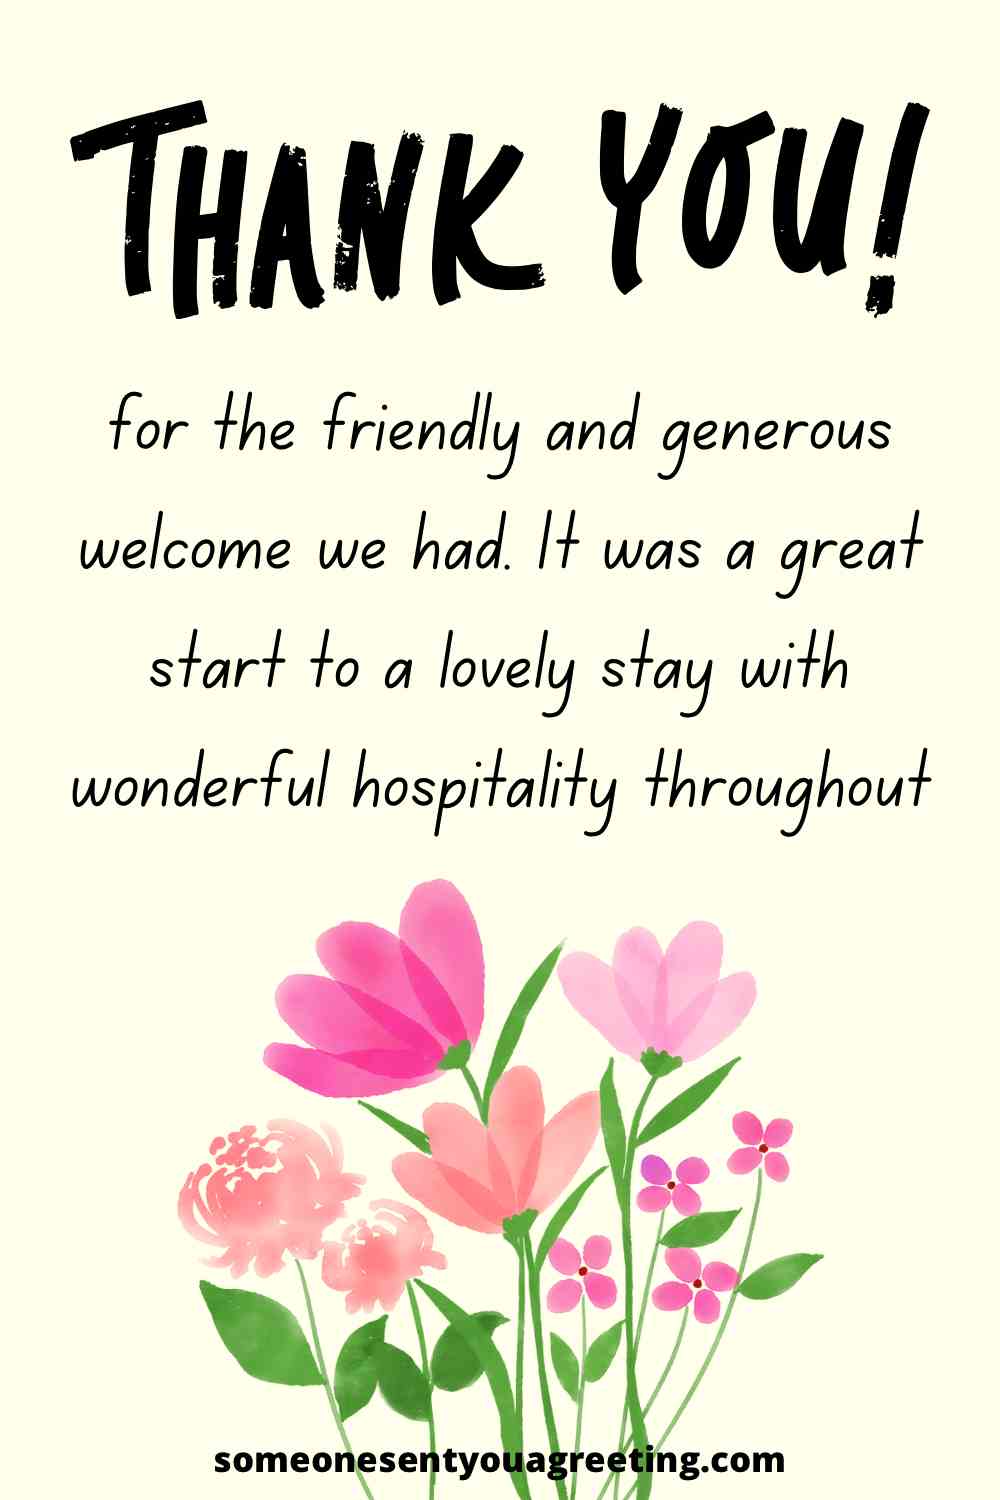 thank you for your hospitality message